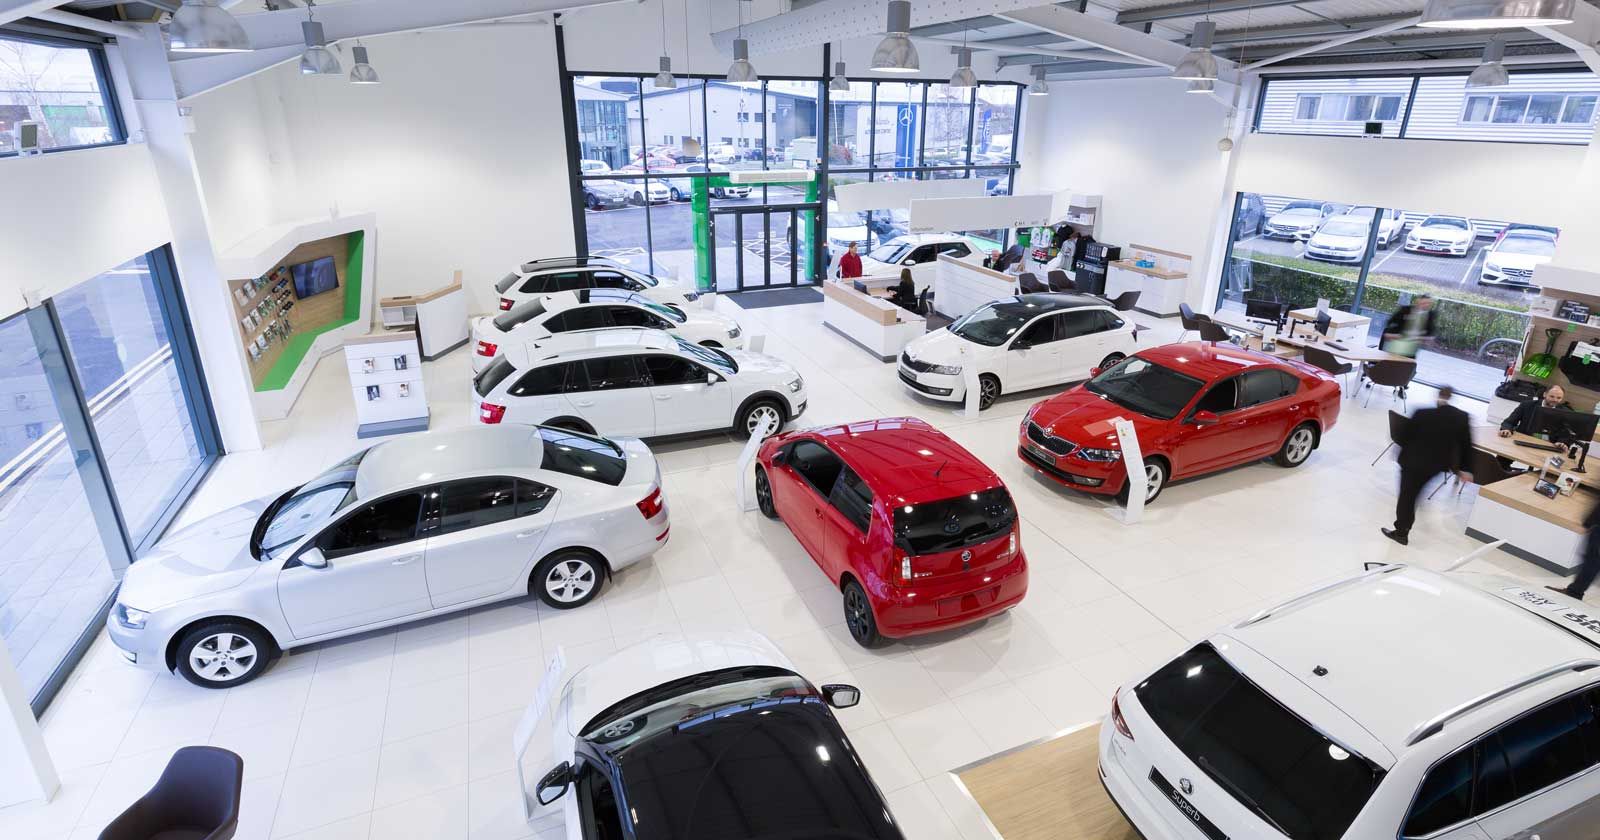 Horton-Skoda-Lincoln-Car-Showroom-interior-Designed-and-Built-by-APSS